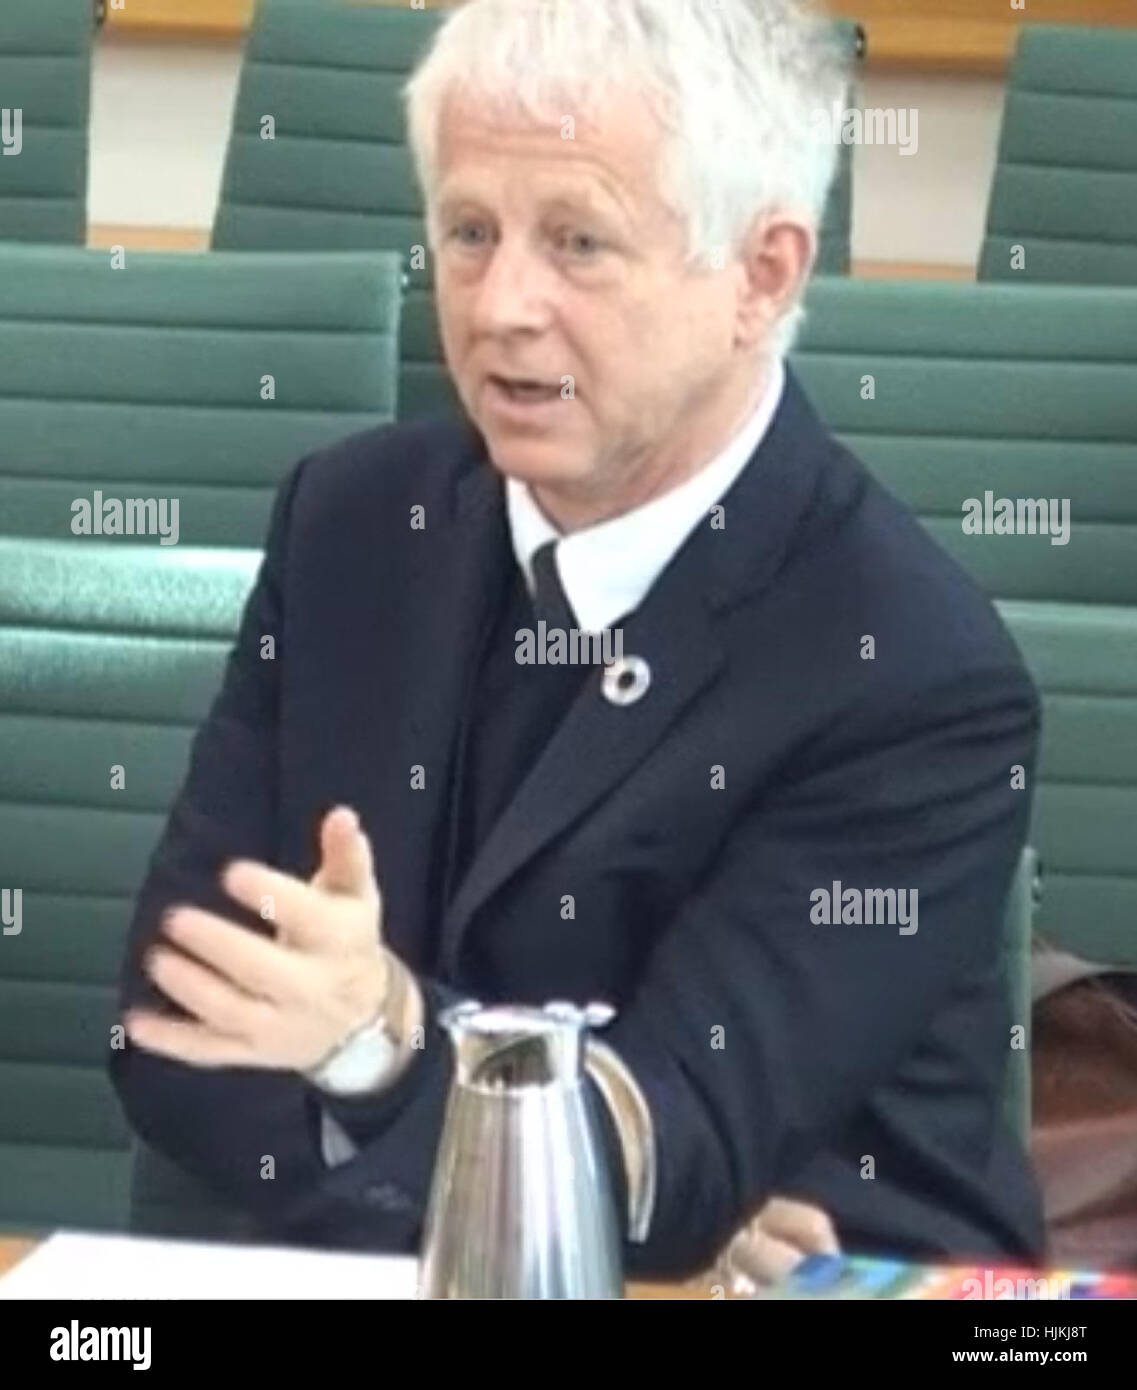 Film director Richard Curtis gives evidence to the Commons Environmental Audit Committee about sustainable development goals, at Portcullis House, London. Stock Photo